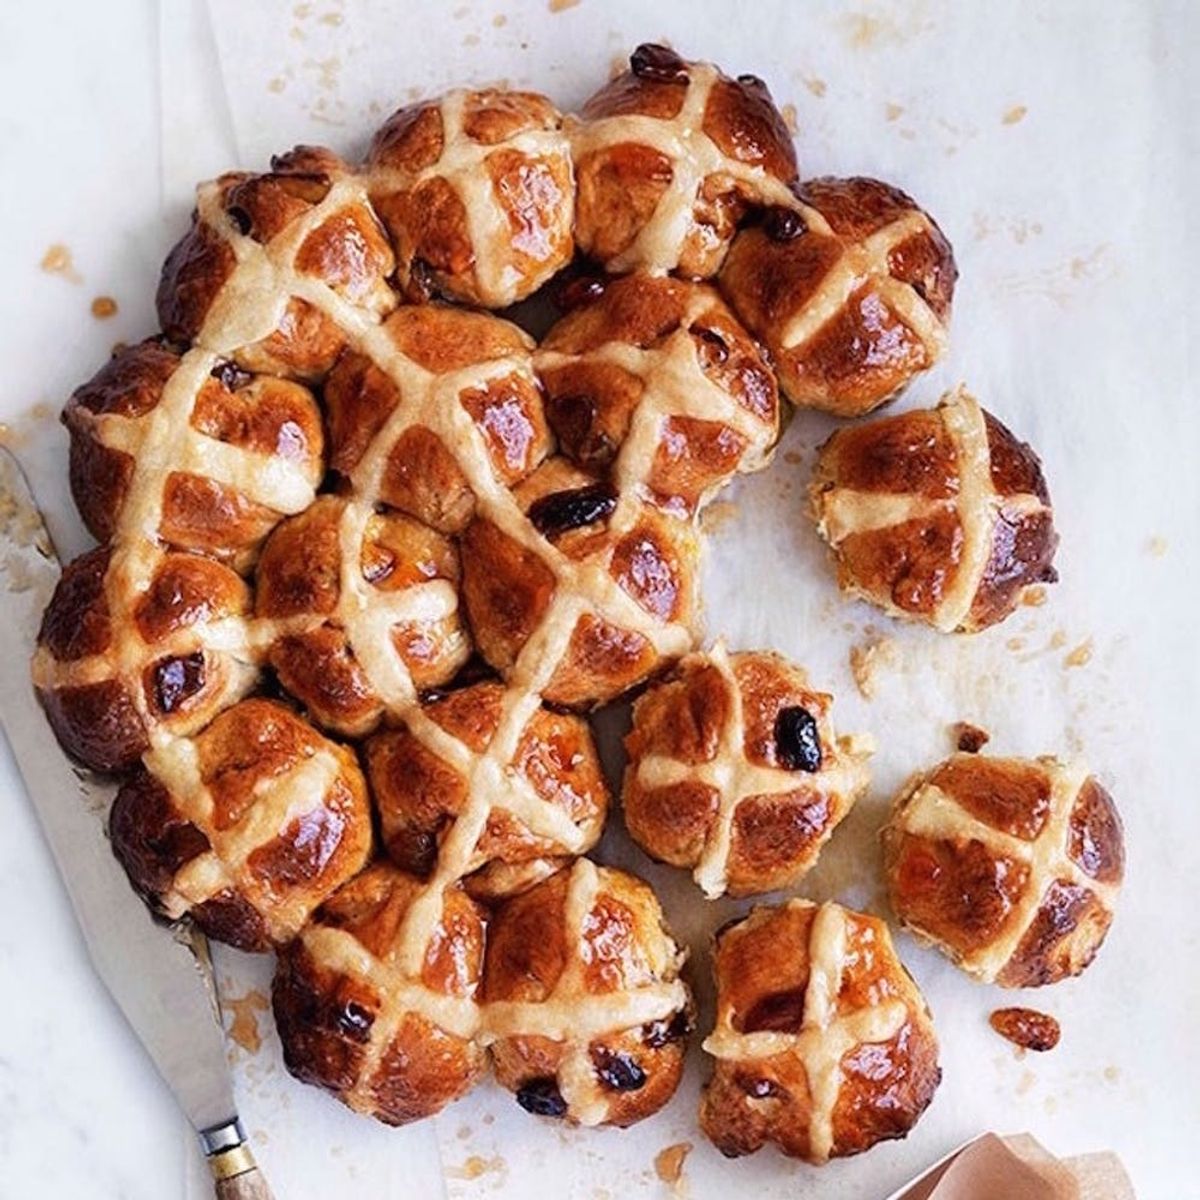 Keep Tradition Alive With These 19 Modern Hot Cross Bun Recipes